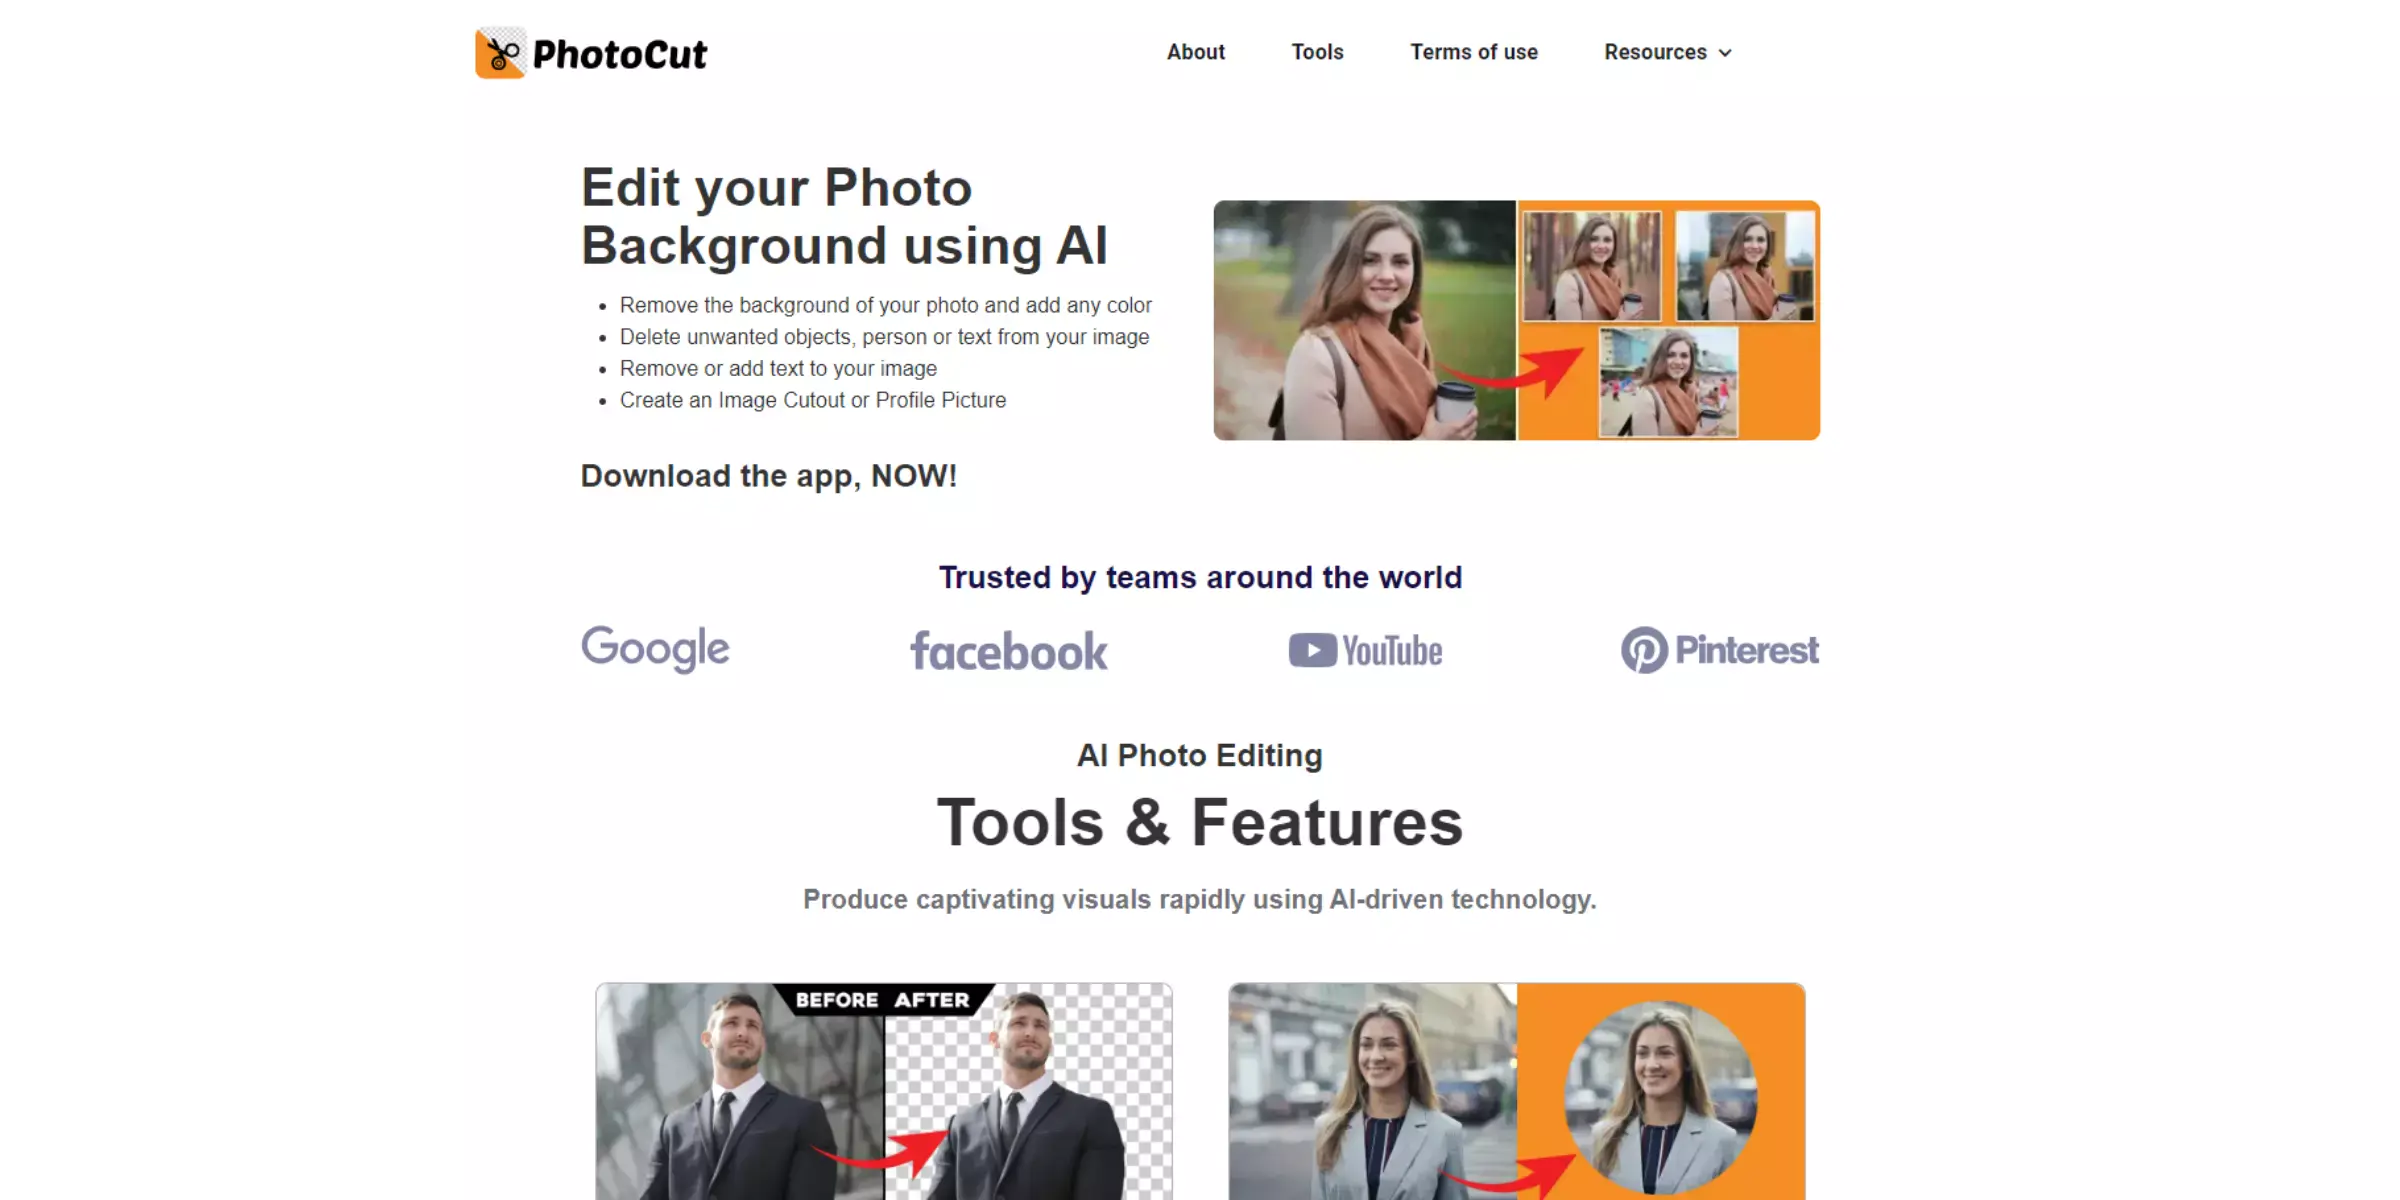 Home page of PhotoCut